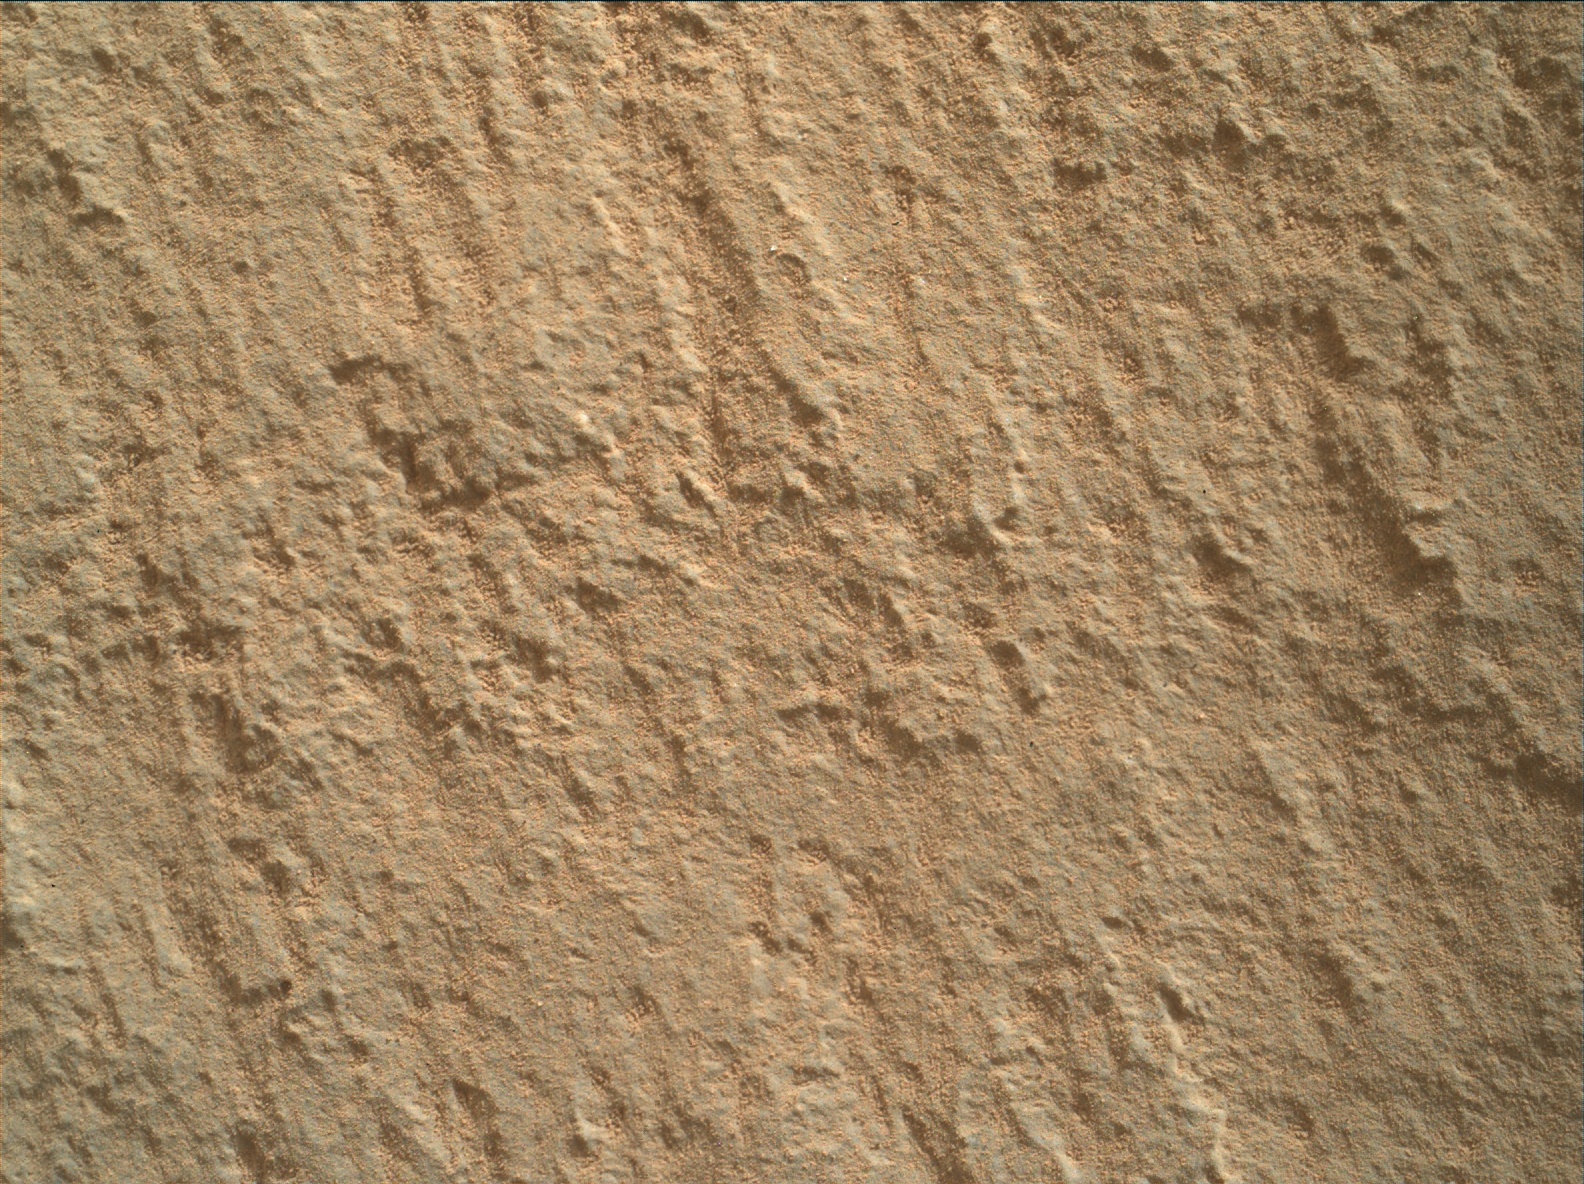 Nasa's Mars rover Curiosity acquired this image using its Mars Hand Lens Imager (MAHLI) on Sol 2702